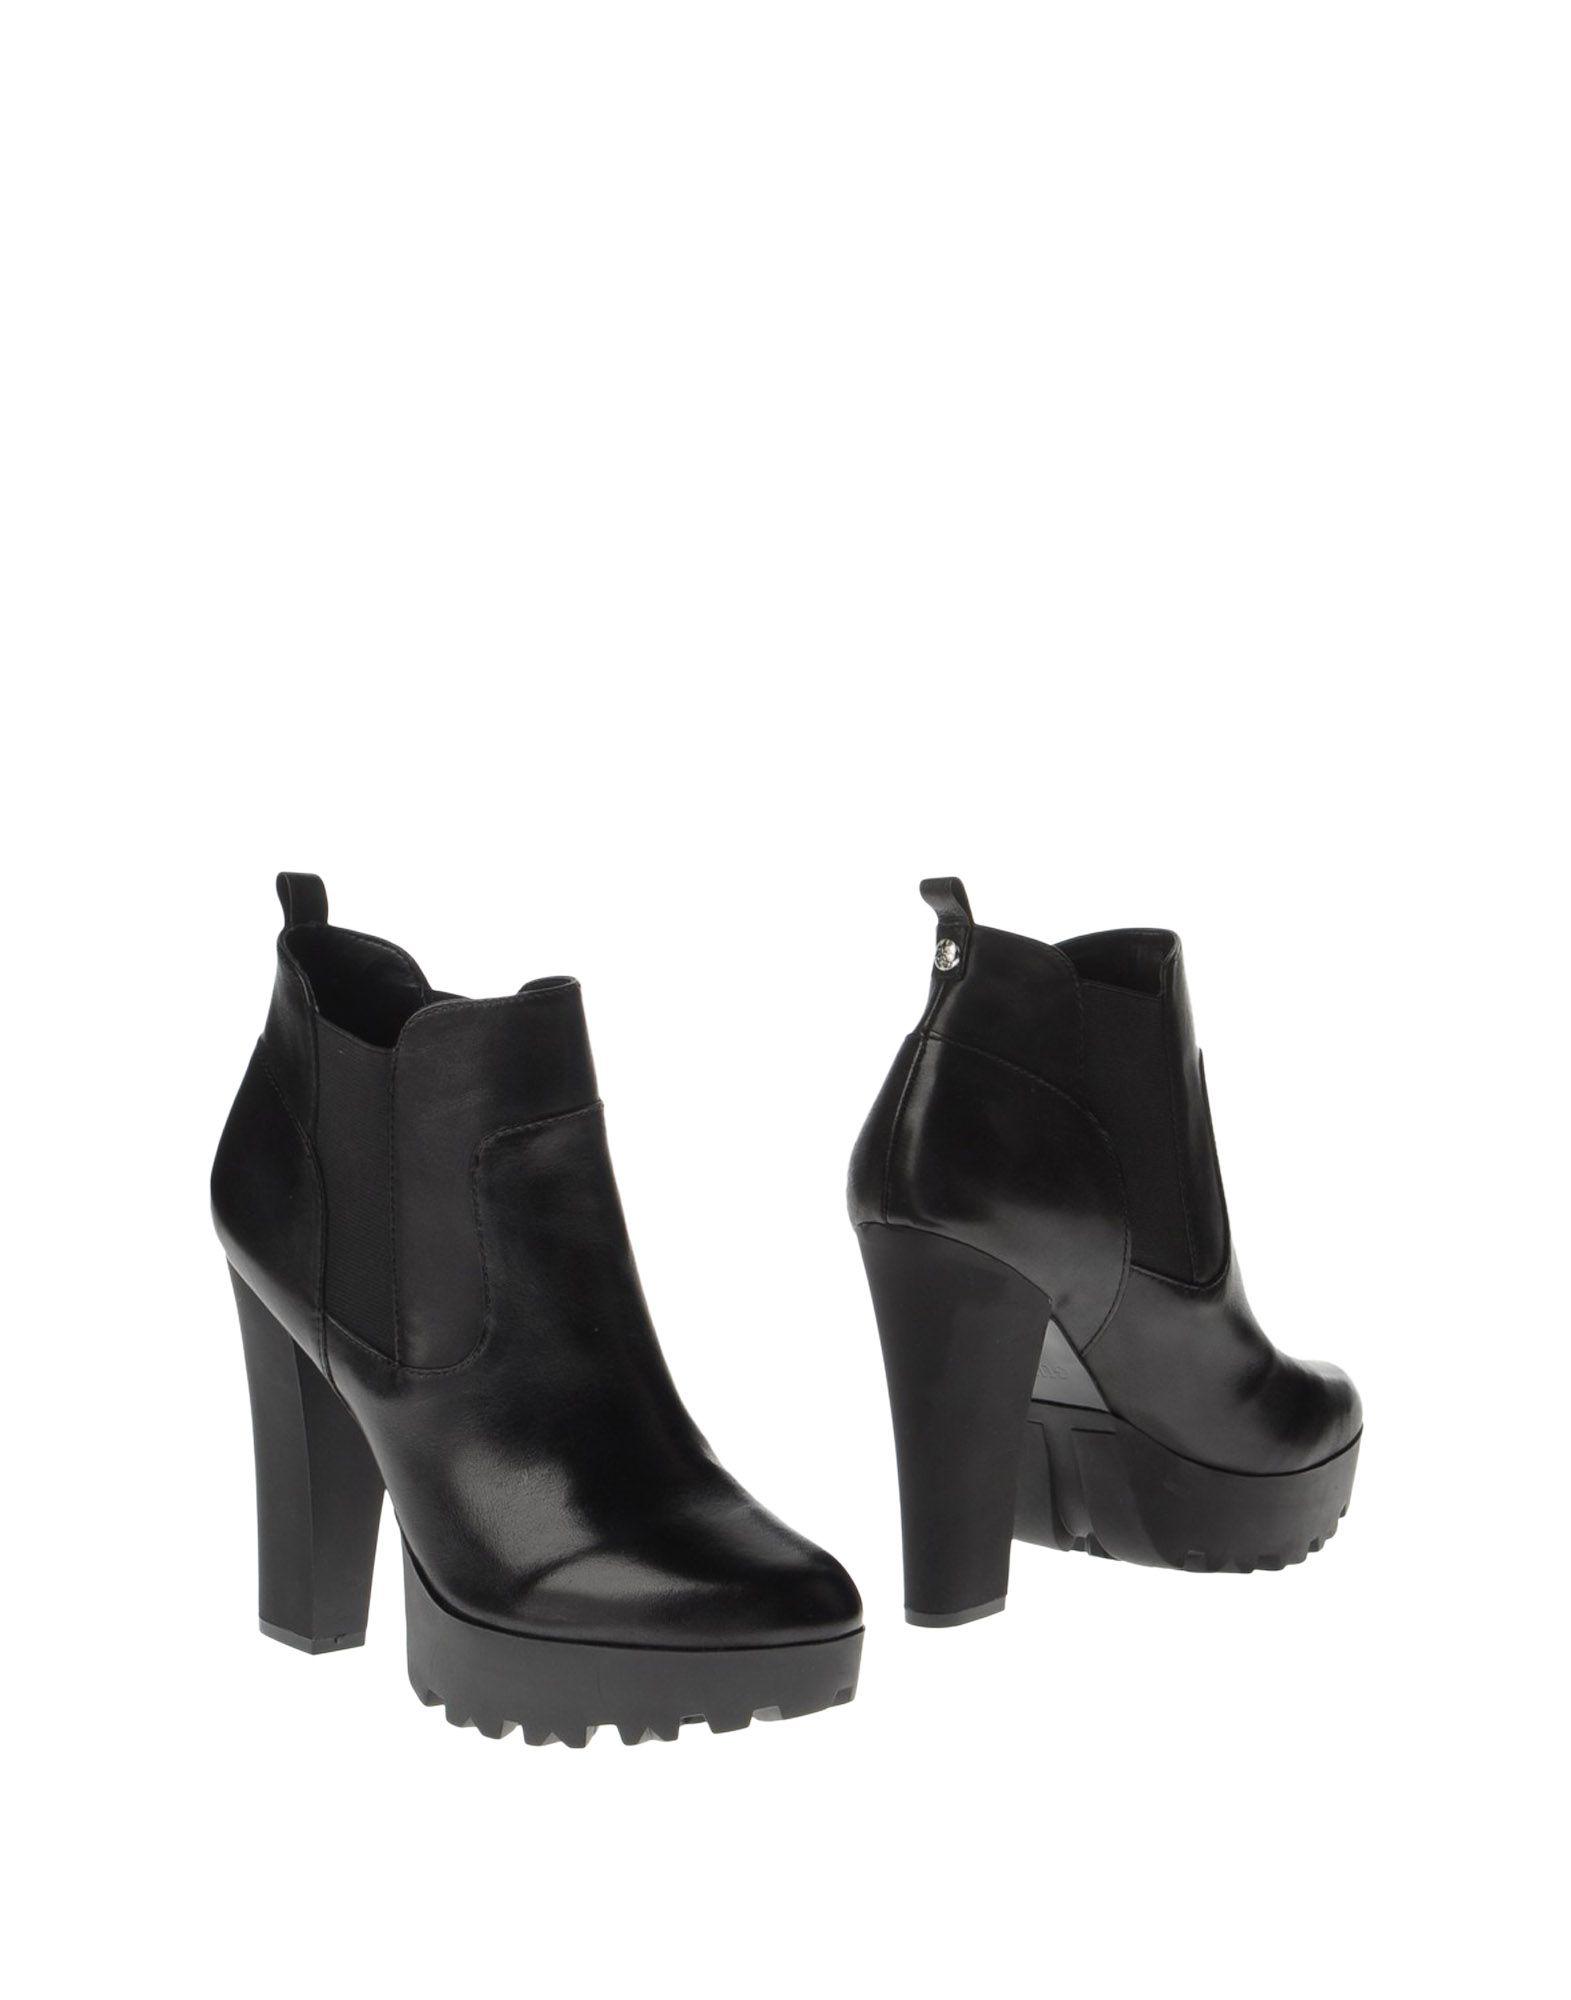 Lyst - Guess Ankle Boots in Black